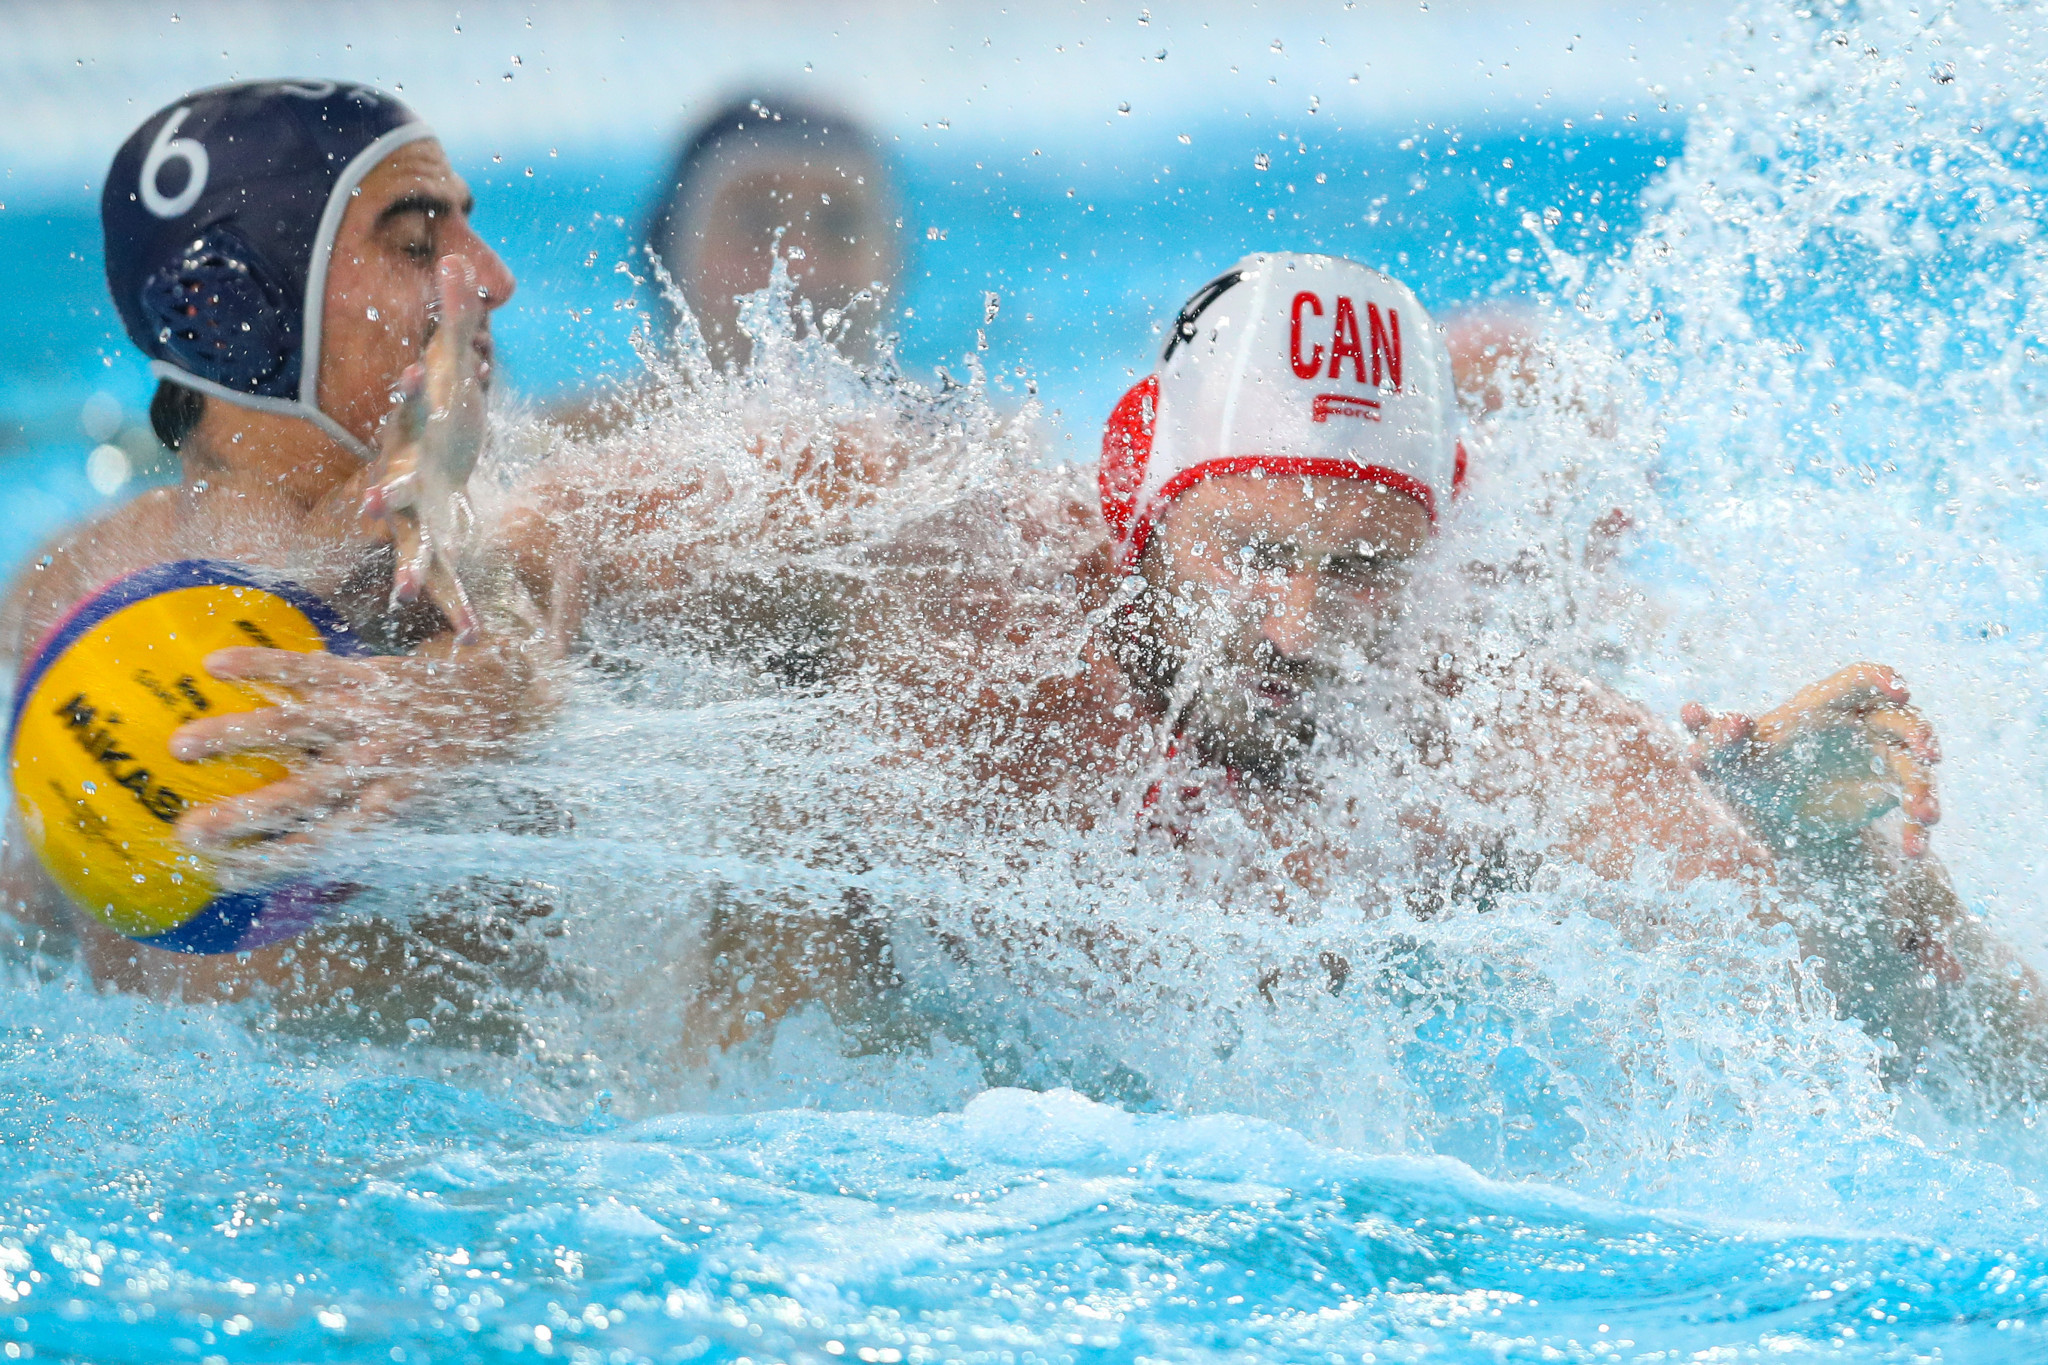 Canada's men's team will compete in a Tokyo 2020 qualifier later this month in Rotterdam ©Getty Images